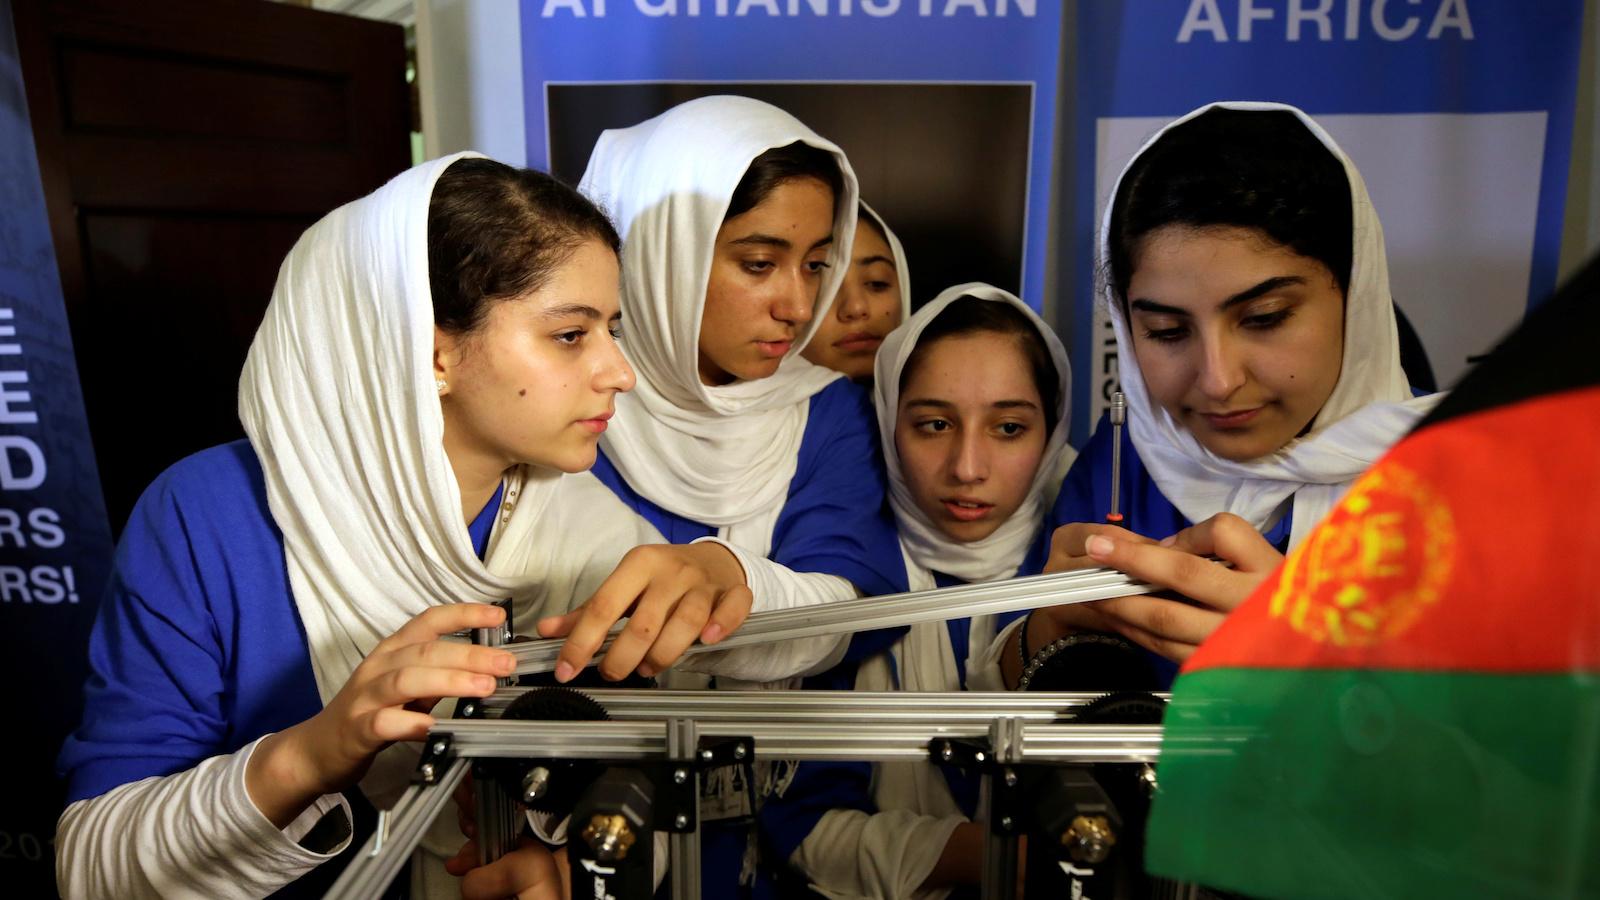 Afghan Girls Robotics Team prepares to compete in first international robot Olympics